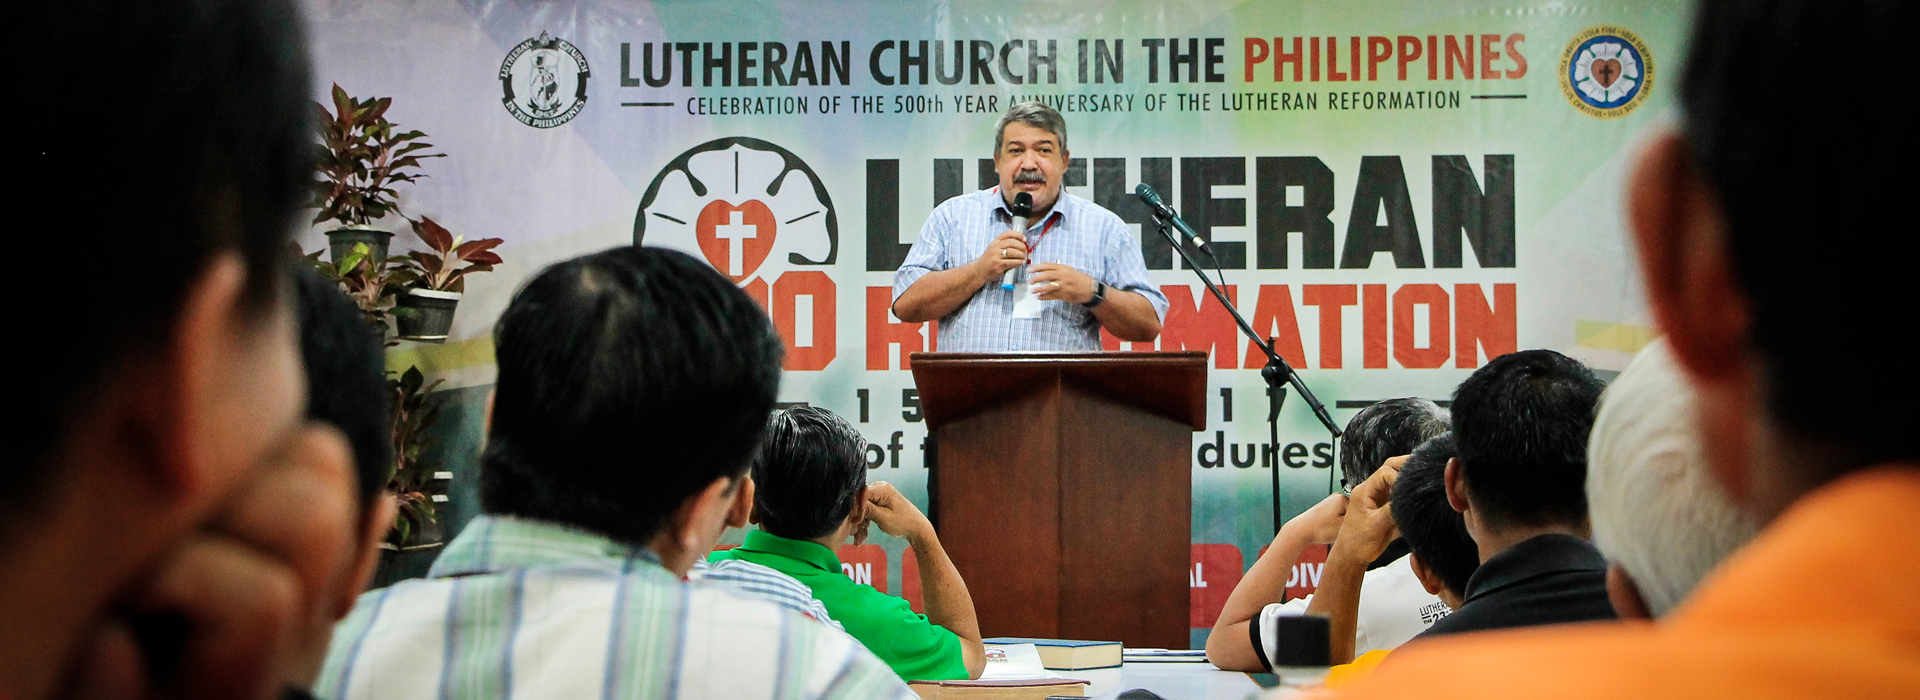 LCP 24th General Convention: President’s Message and Report